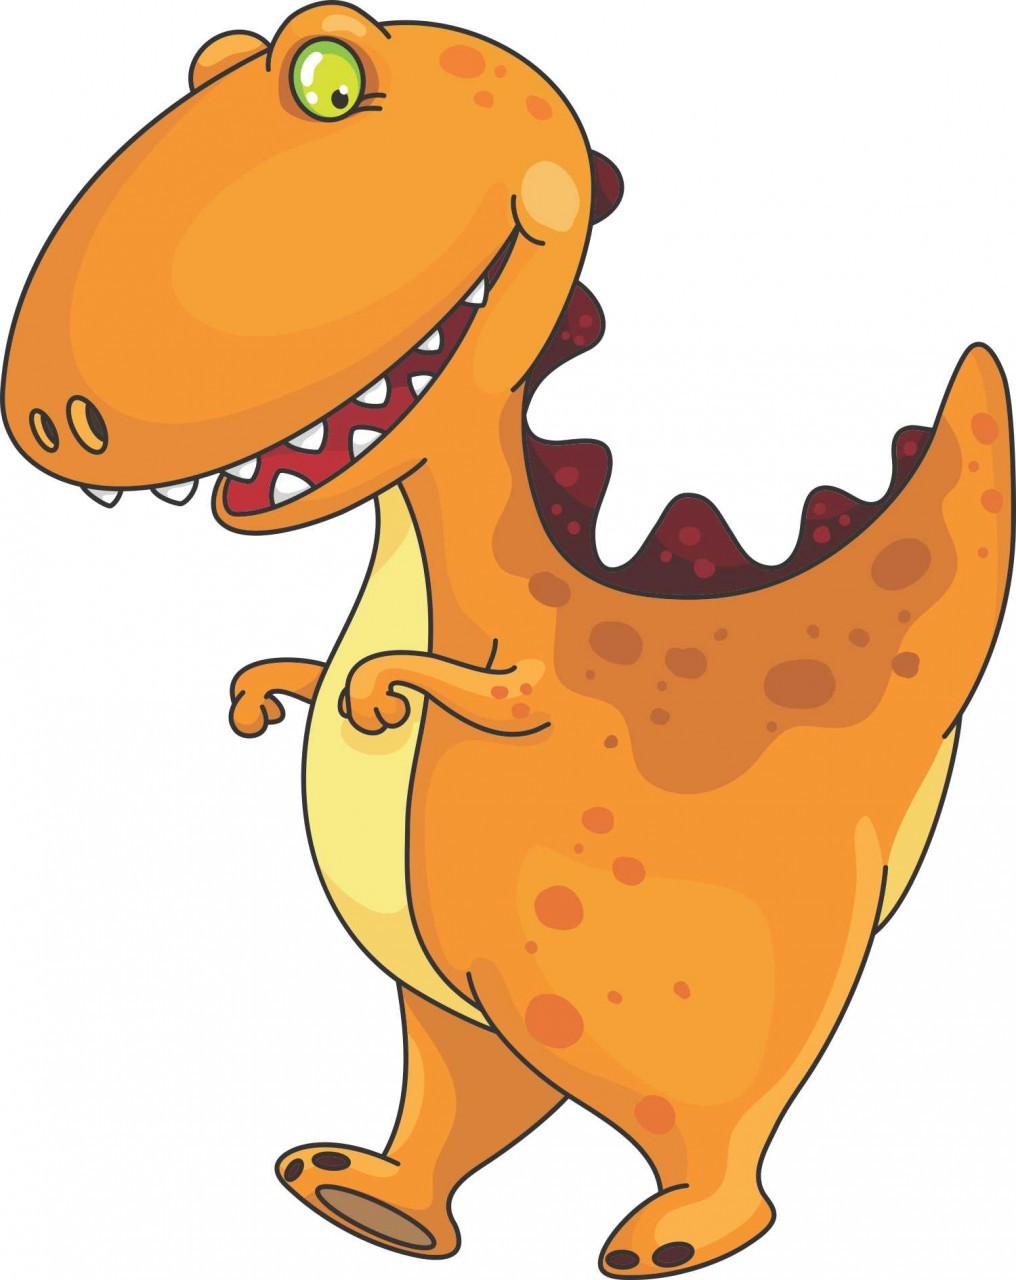 Cute T-rex picture for kids